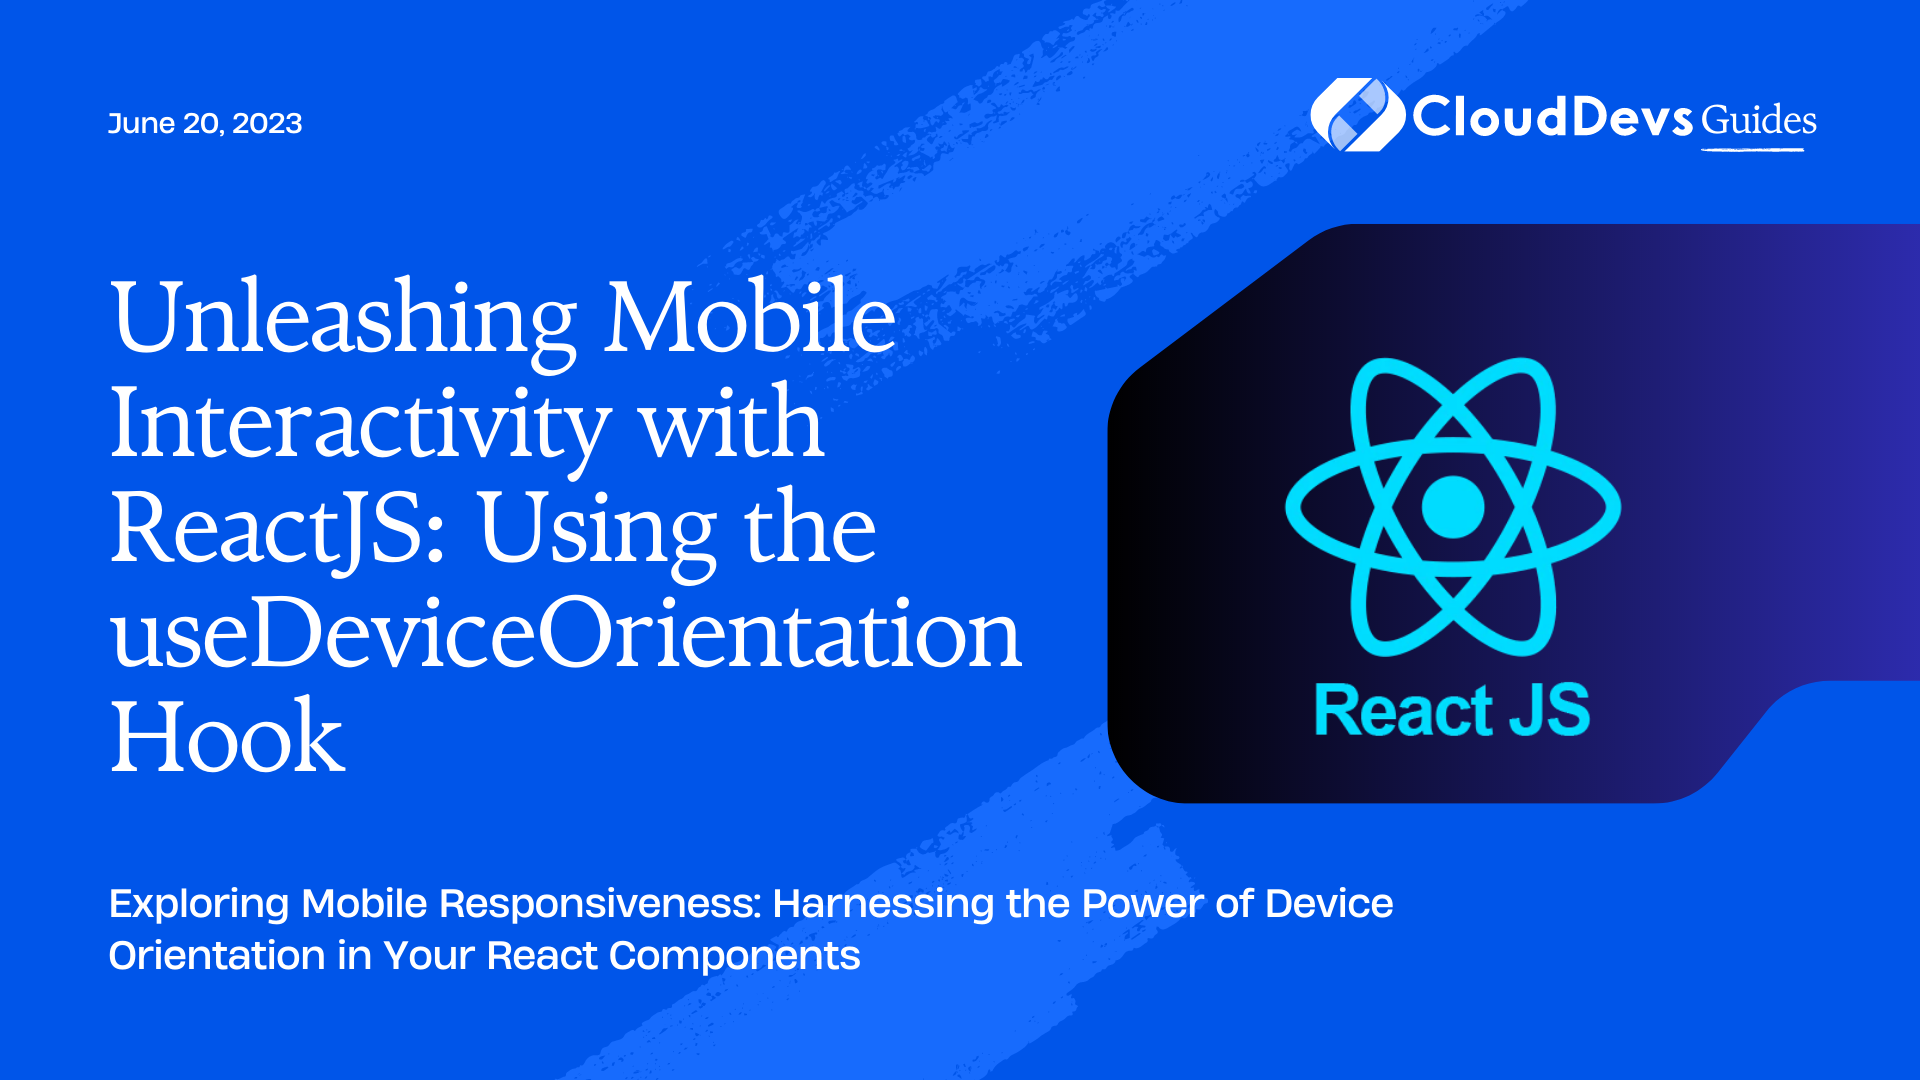 Unleashing Mobile Interactivity with ReactJS: Using the useDeviceOrientation Hook